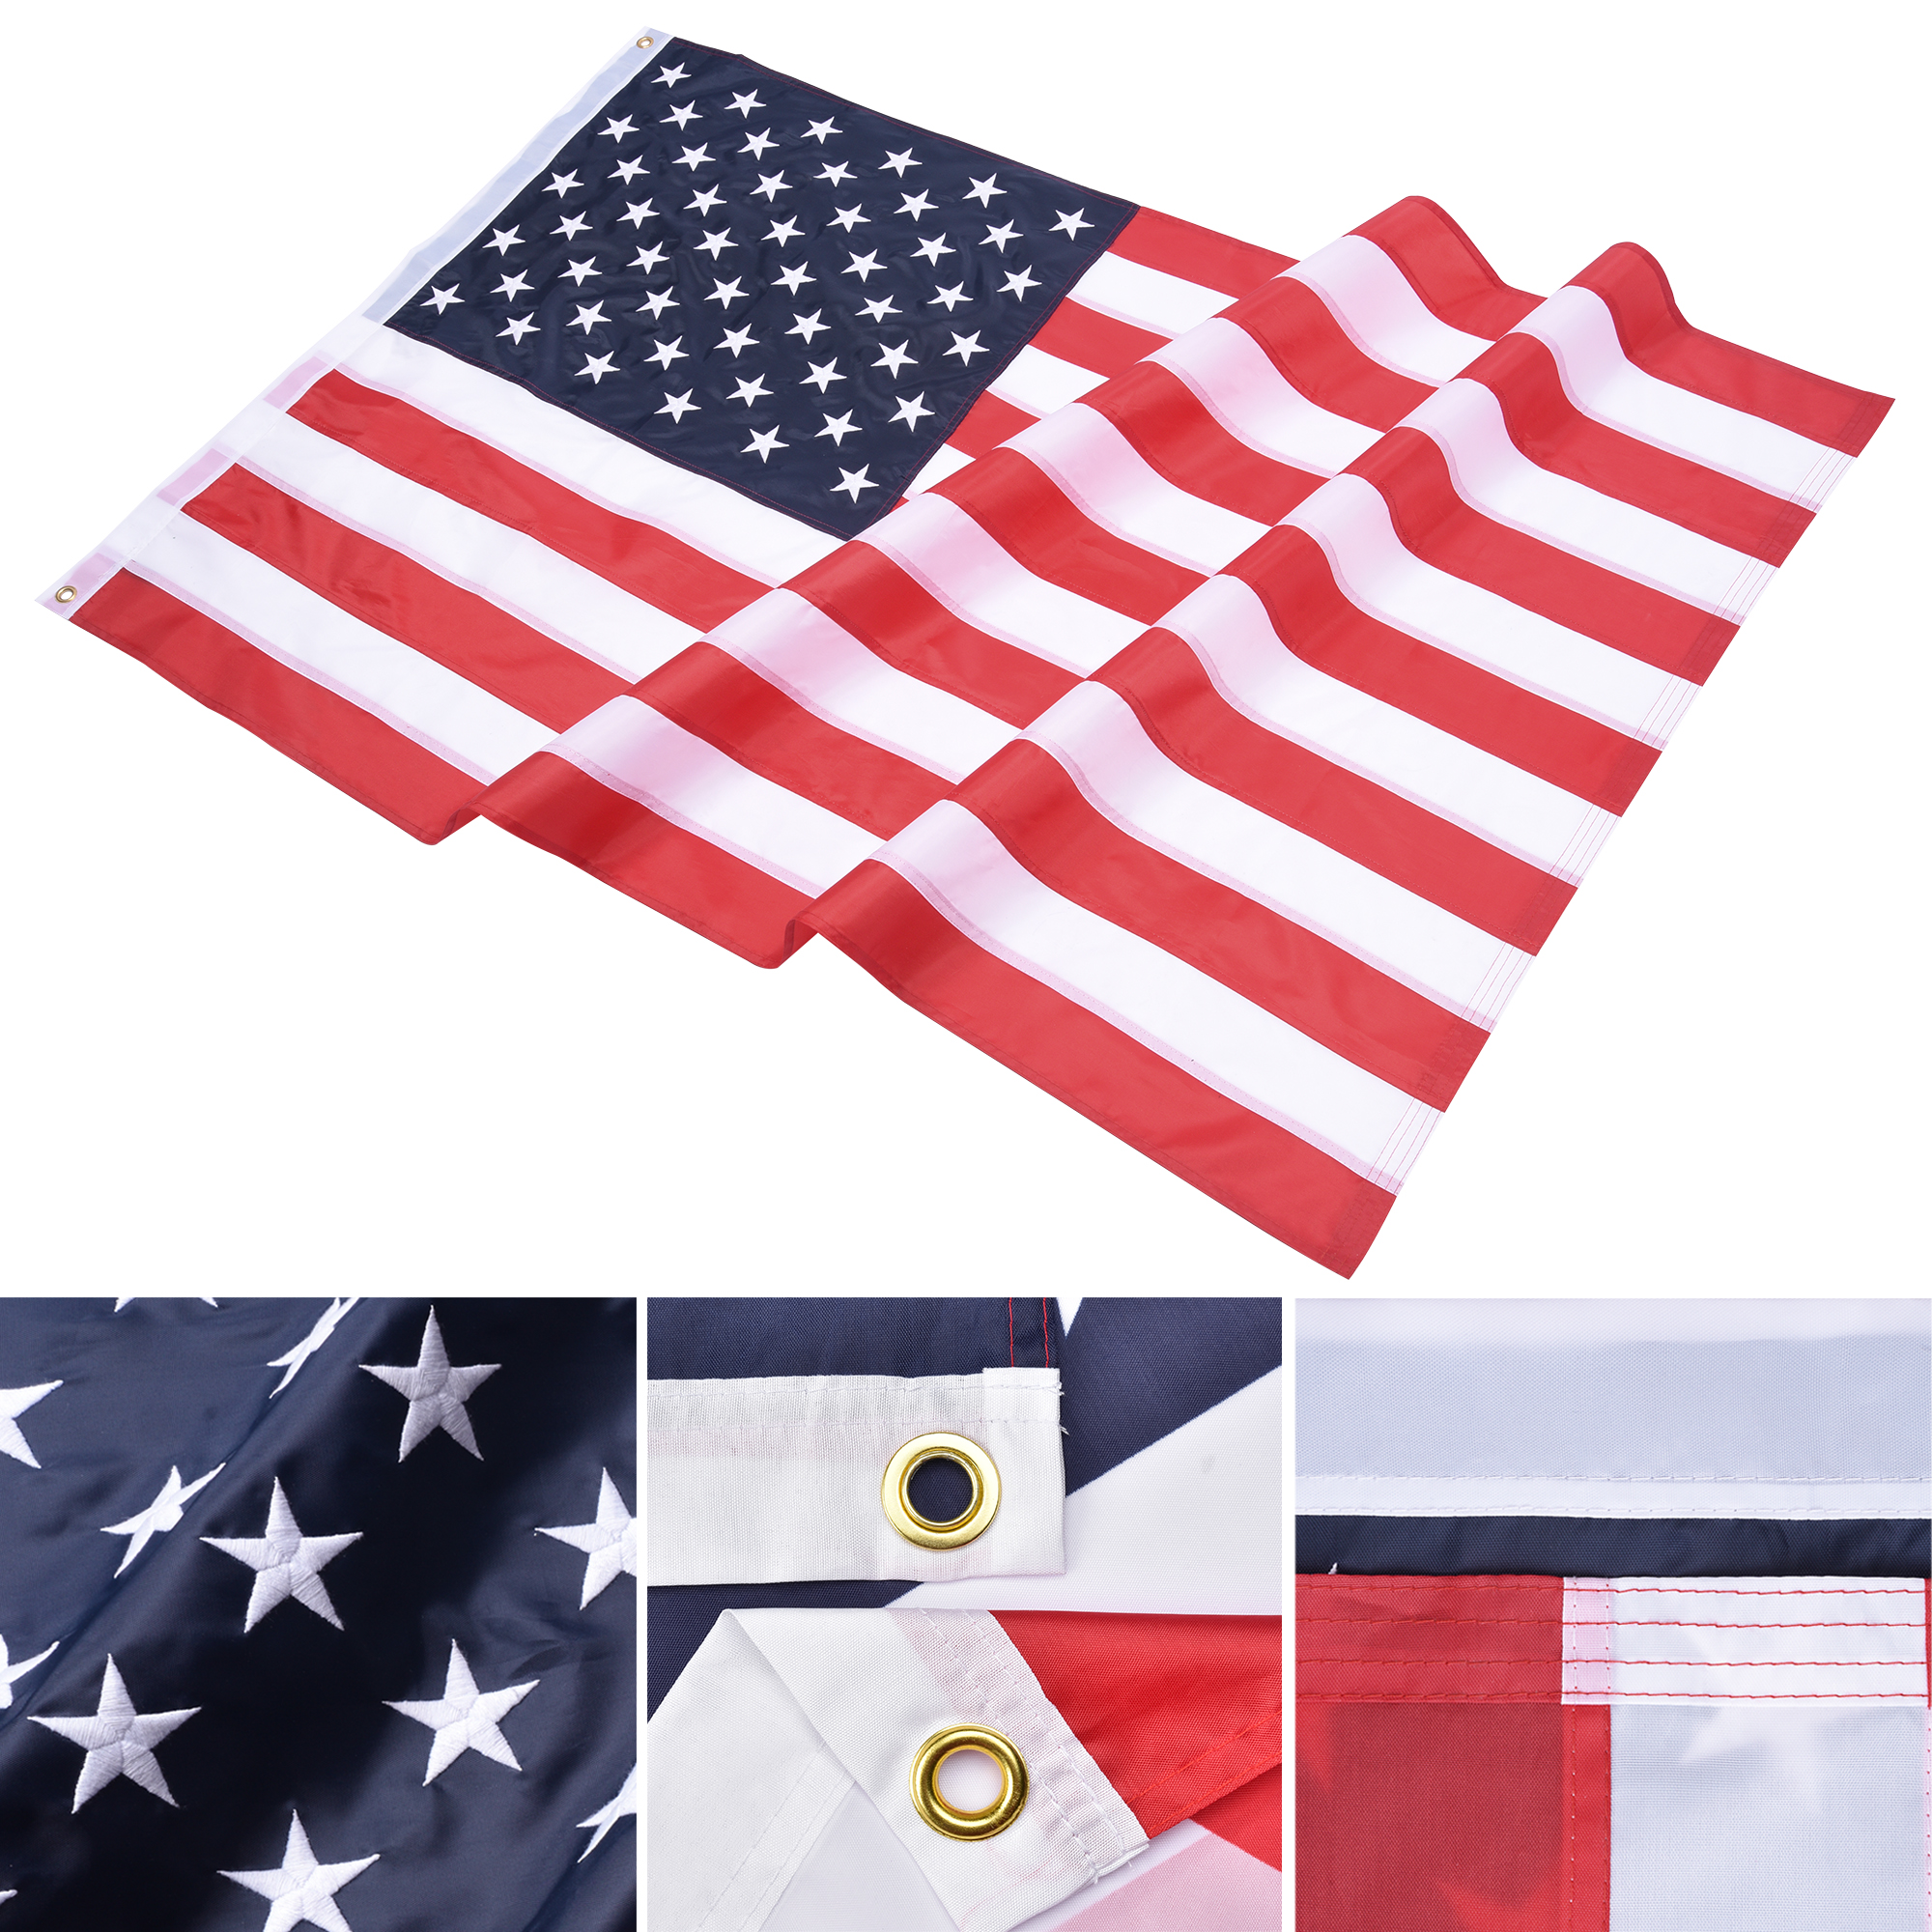 20/25/30ft Sectional Flagpole Aluminum Kit Outdoor Halyard Pole Can Fly 2 Flag 